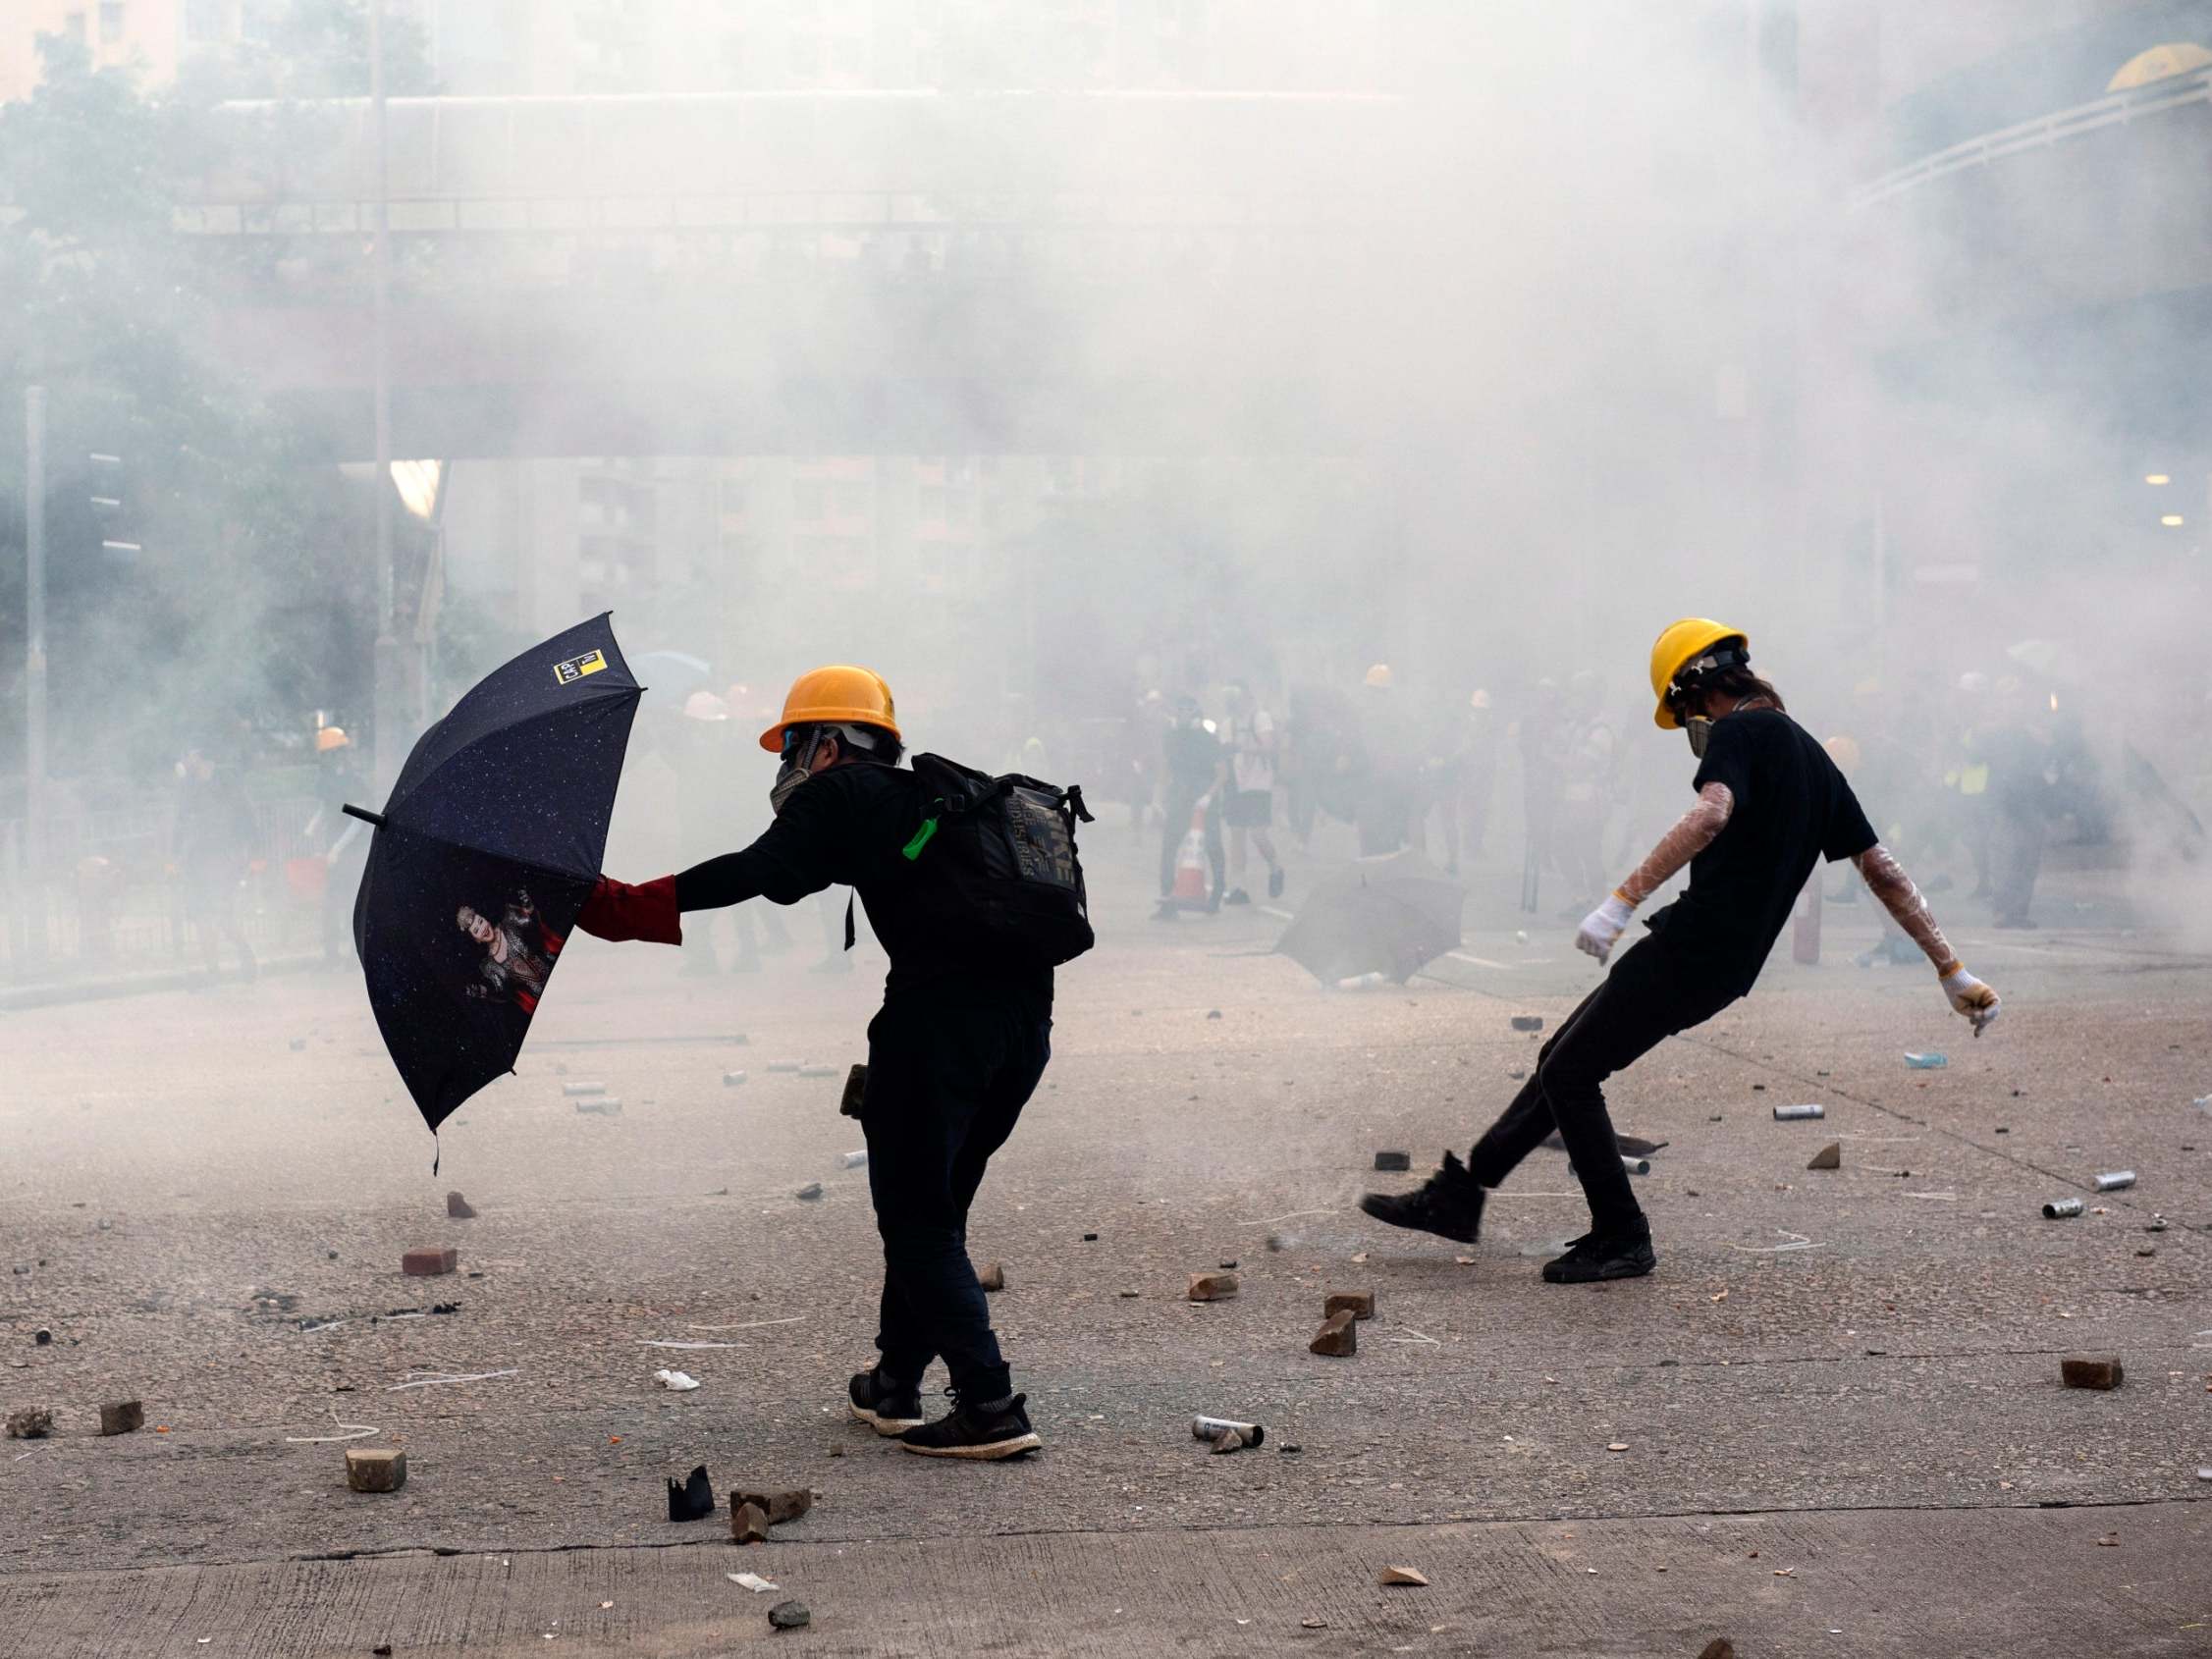 Anti-extradition protesters react after teargas is fired by police during clashes in Wong Tai Sin on 5 August